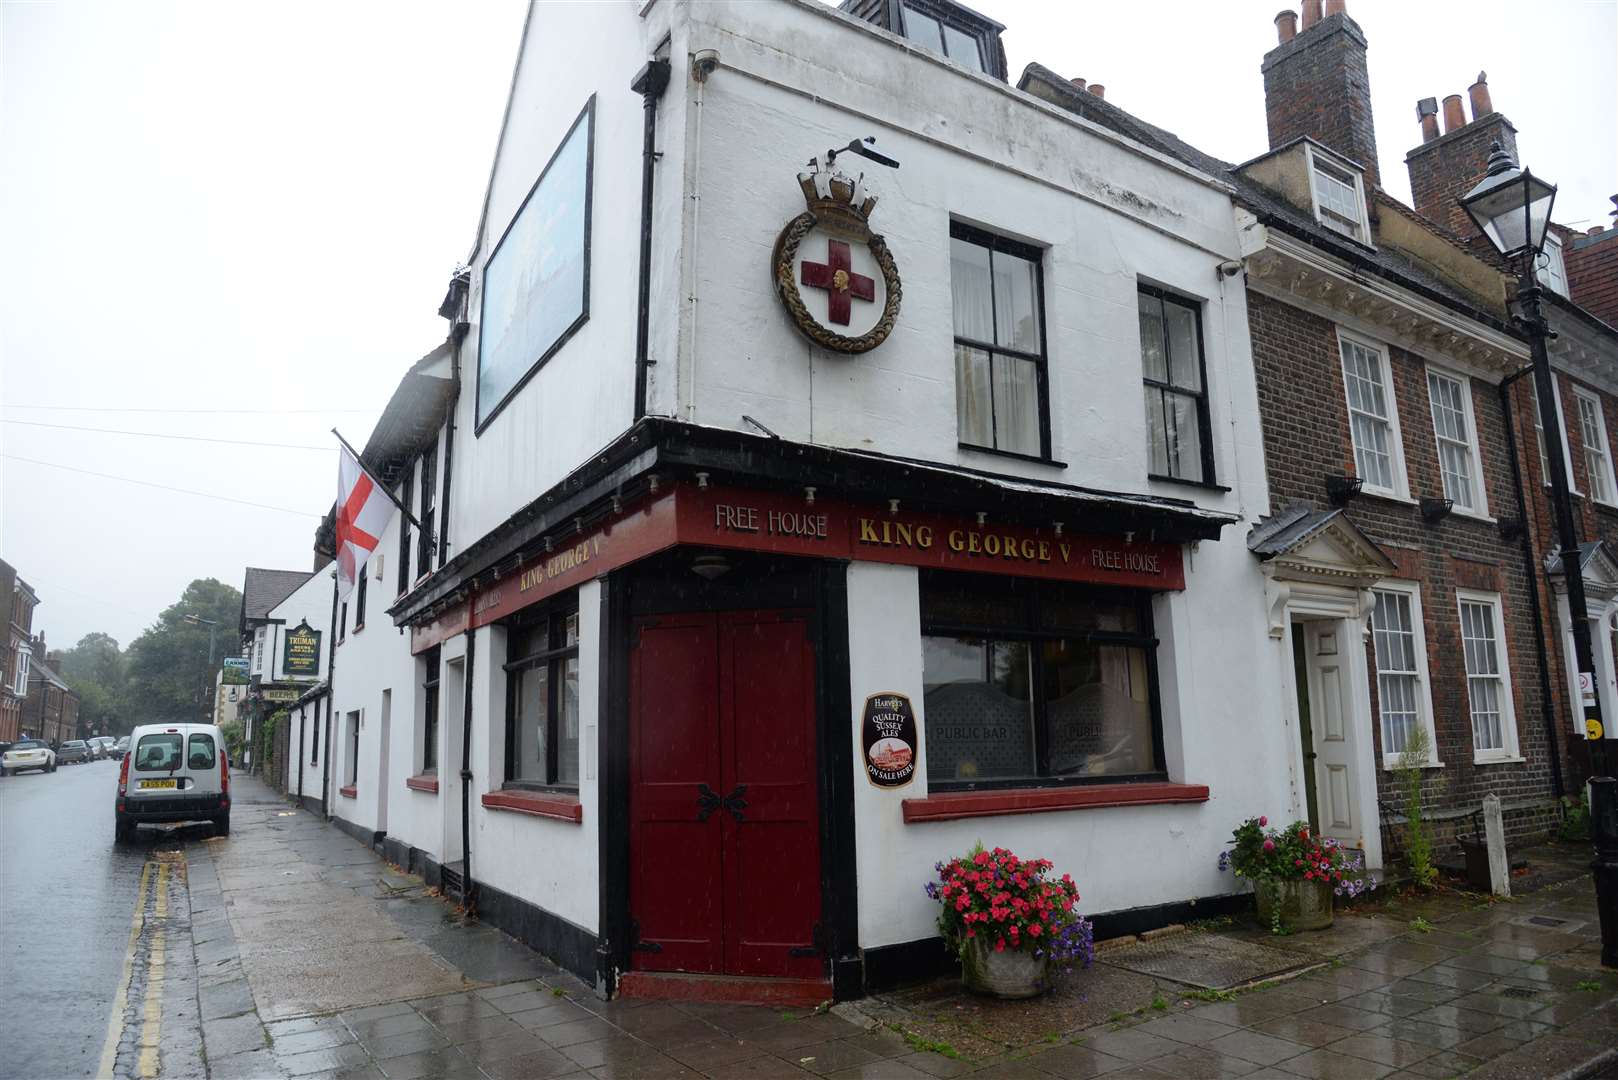 The King George V pub in Brompton is closing in the New Year for works to comply with new fire regulations